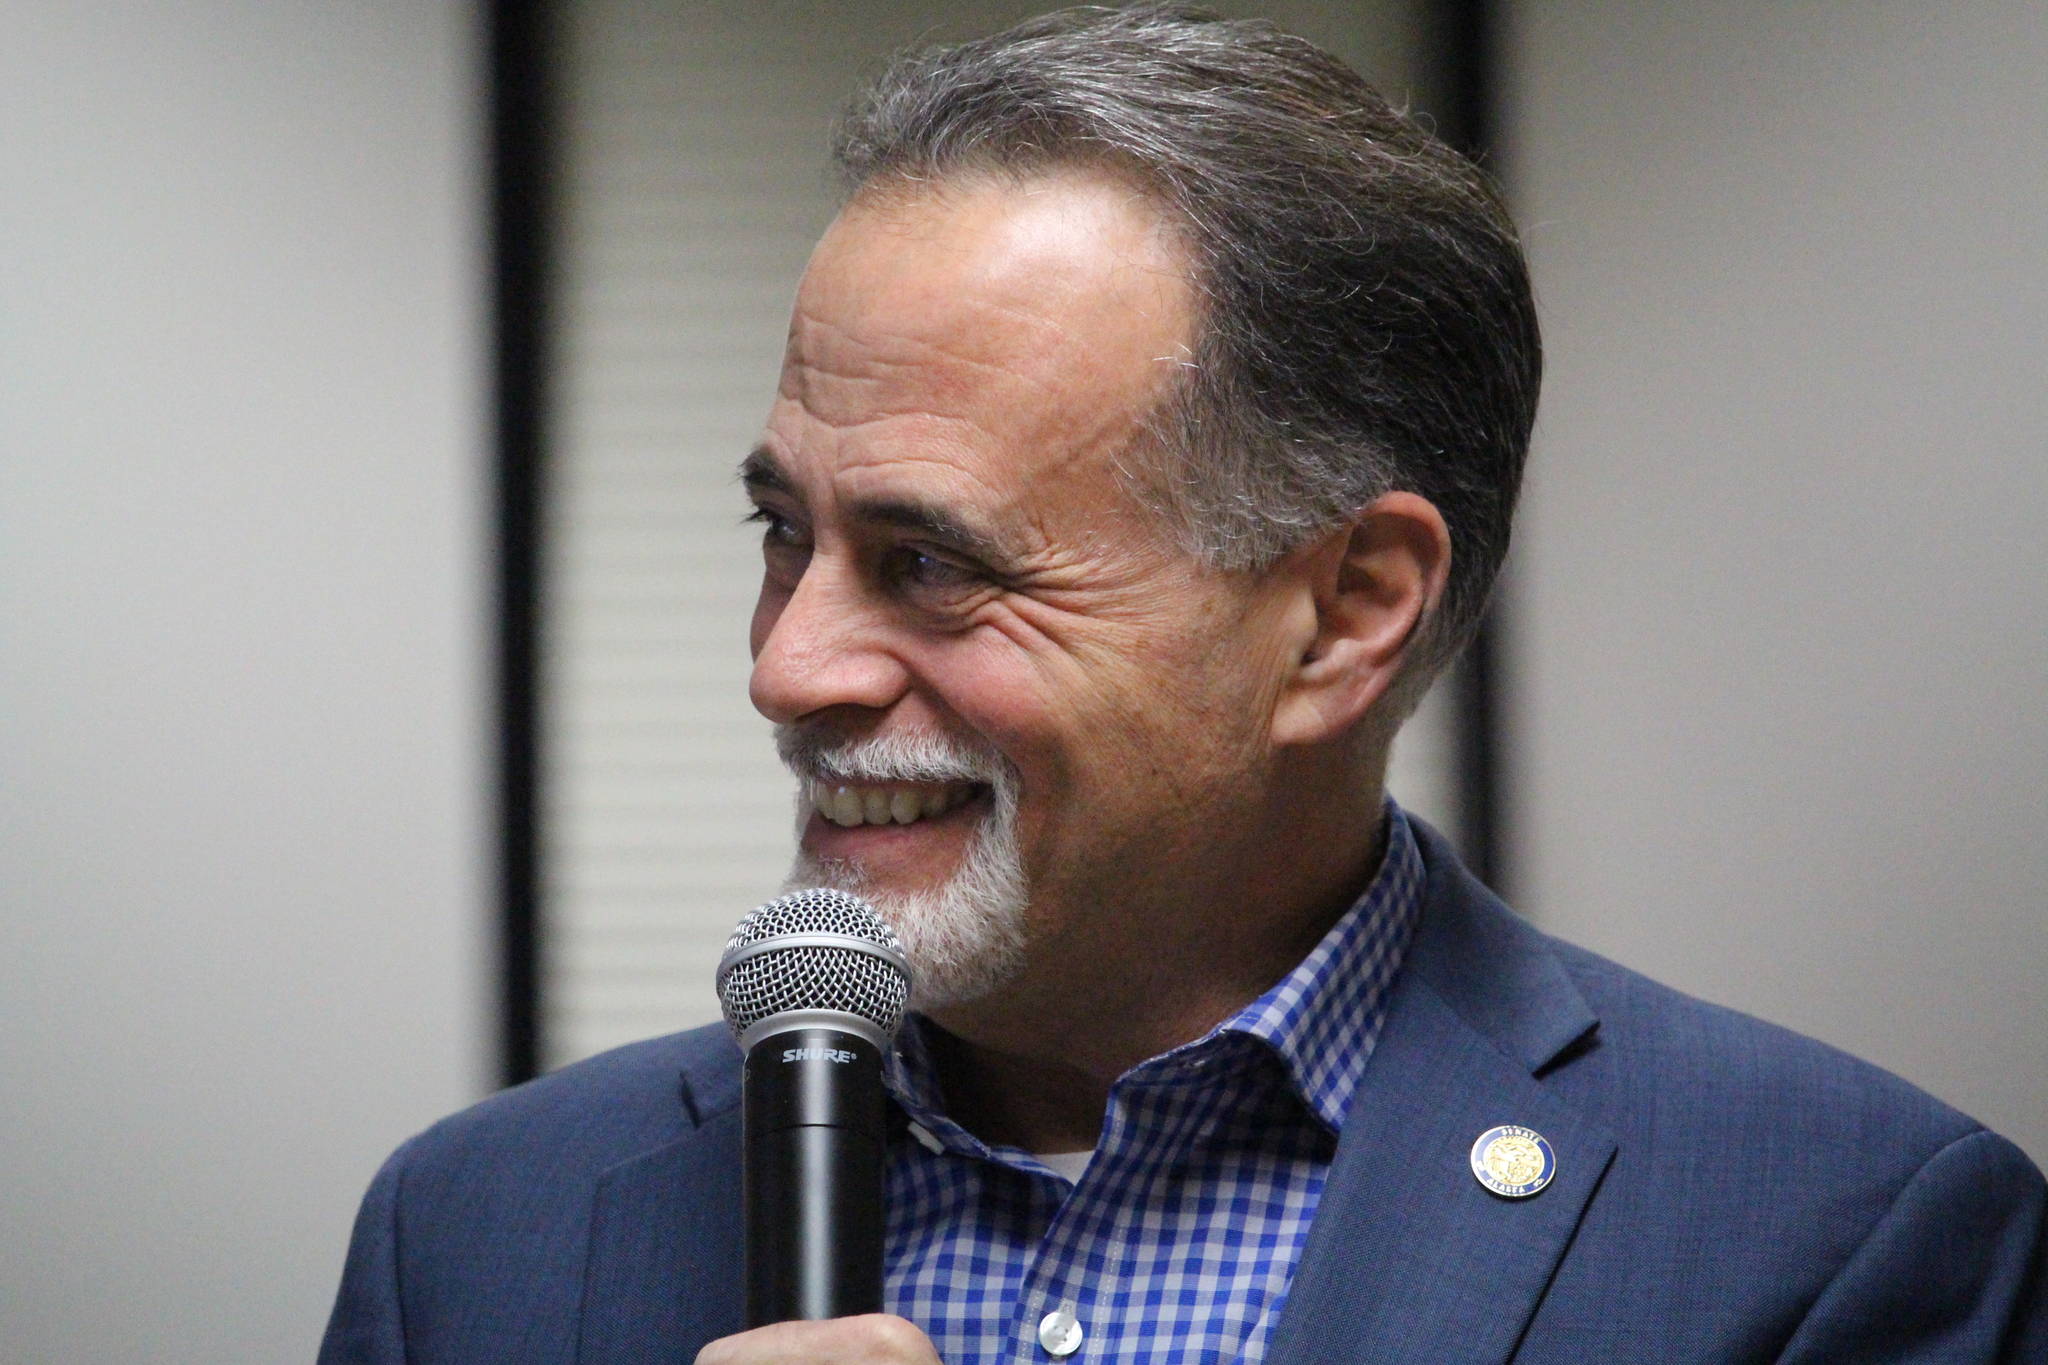 Sen. Peter Micciche, R-Soldotna, speaks to constituents during a town hall at the Betty J. Glick Assembly Chambers in Soldotna, Alaska on Jan. 16, 2020. (Photo by Brian Mazurek/Peninsula Clarion)